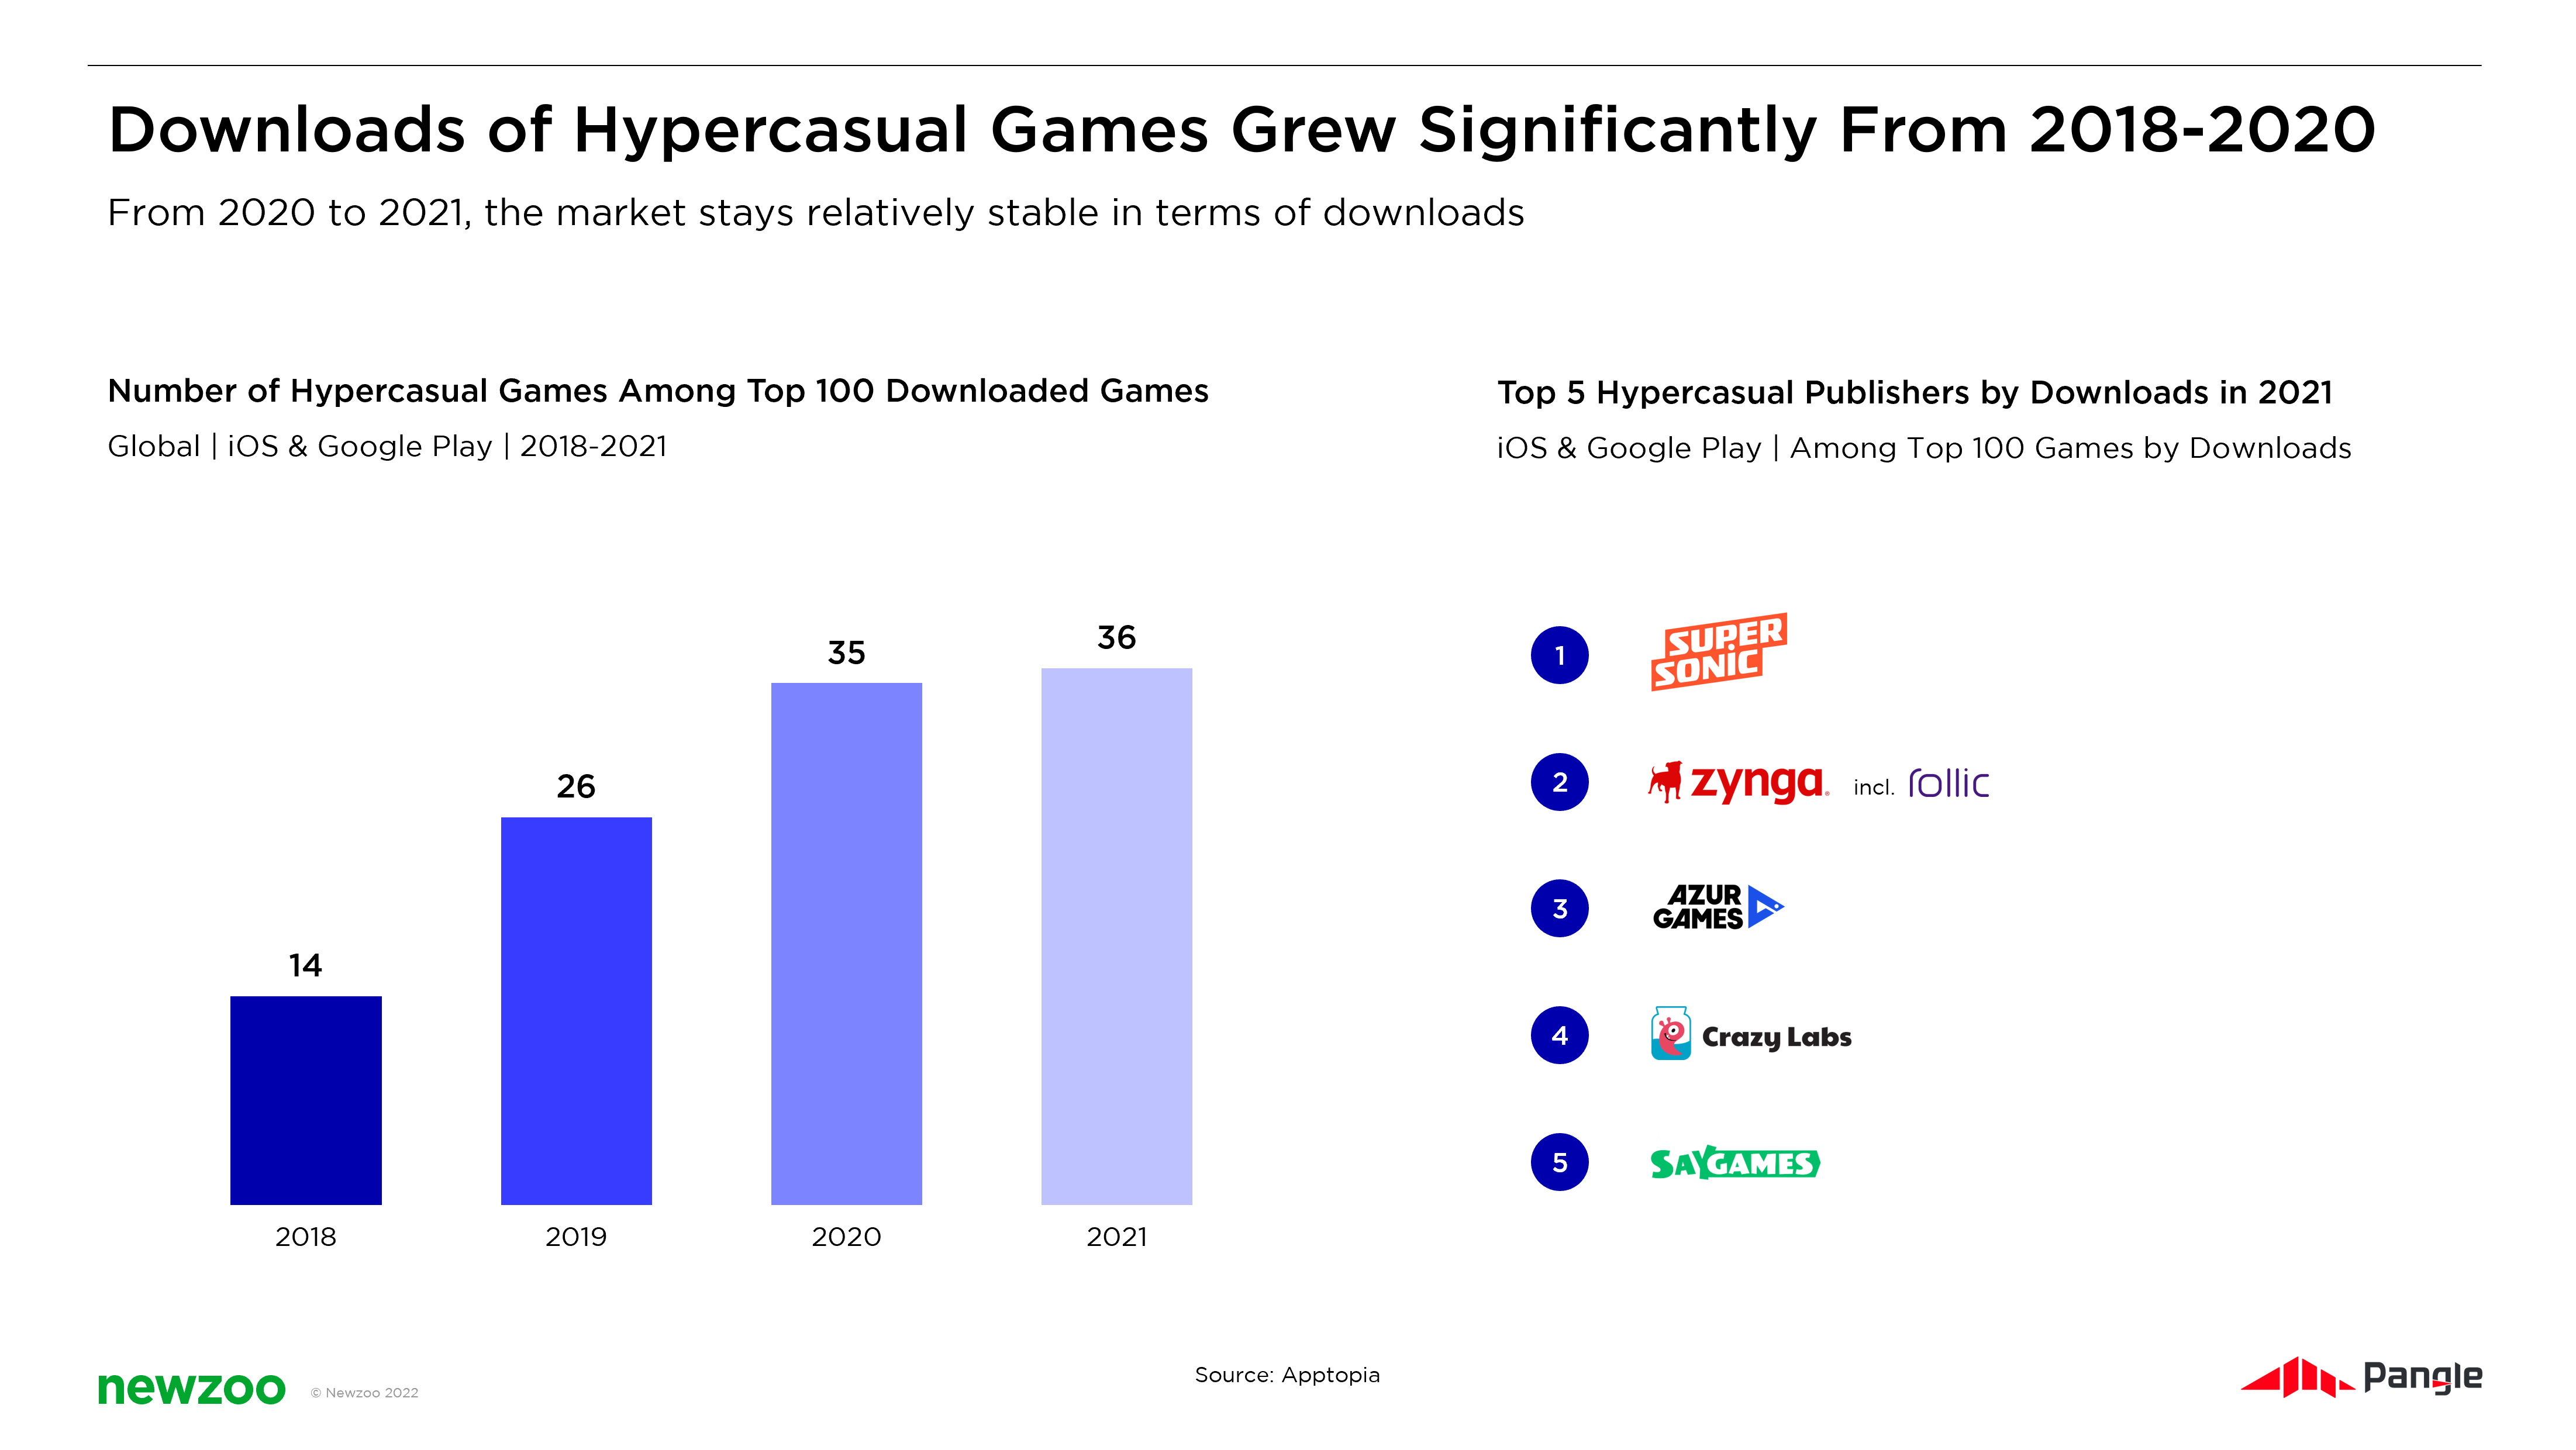 Finding Moji: Top Grossing Hyper Casual Game, UFO Games